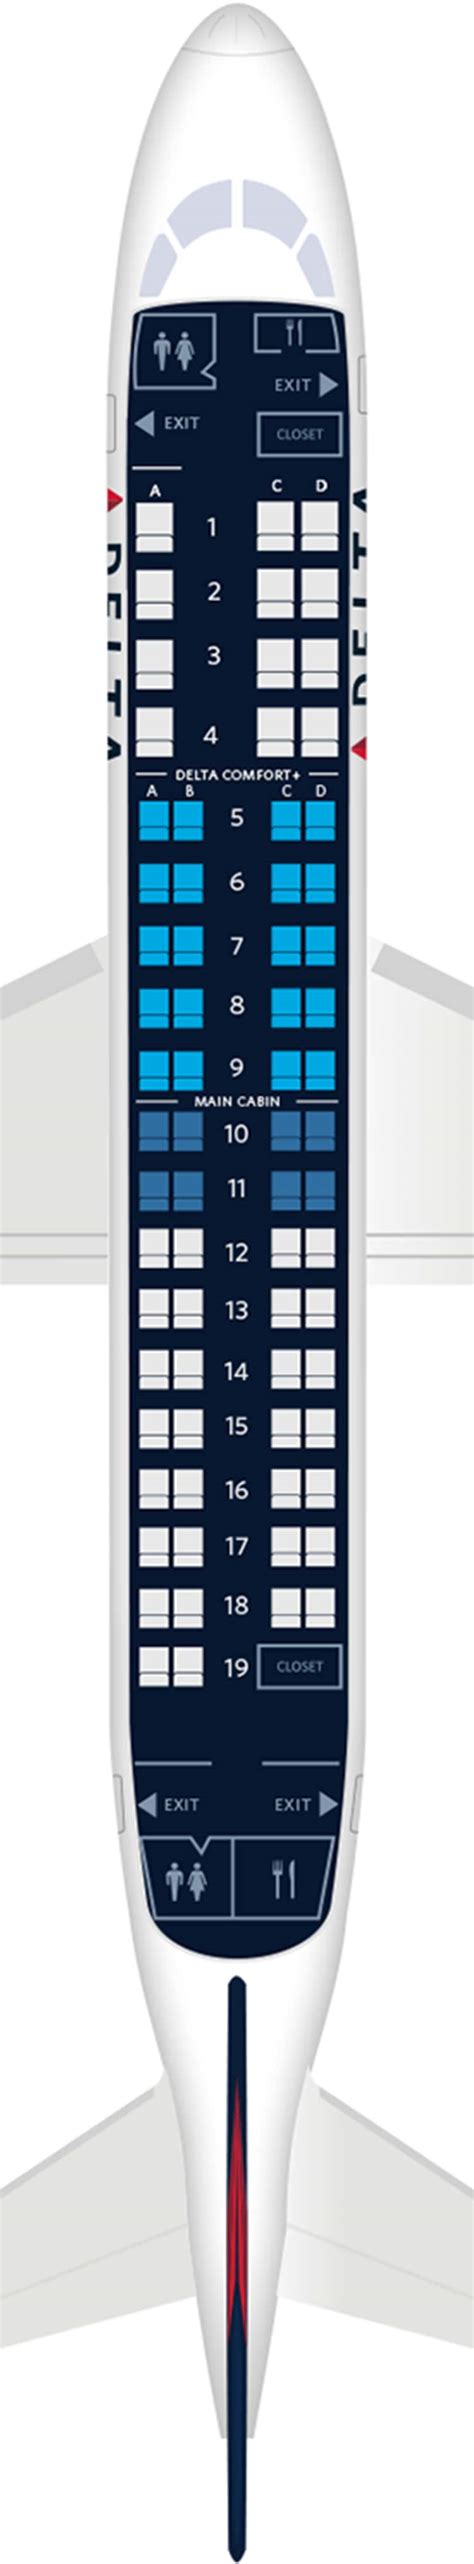 Embraer 175 seating map. Royal Jordanian flies their version of Embraer ERJ-175 in a two class configuration with 12 Business Class recliner seats and 60 standard Economy Class seats. For your next Royal Jordanian flight, use this seating chart to get the most comfortable seats, legroom, and recline on . 